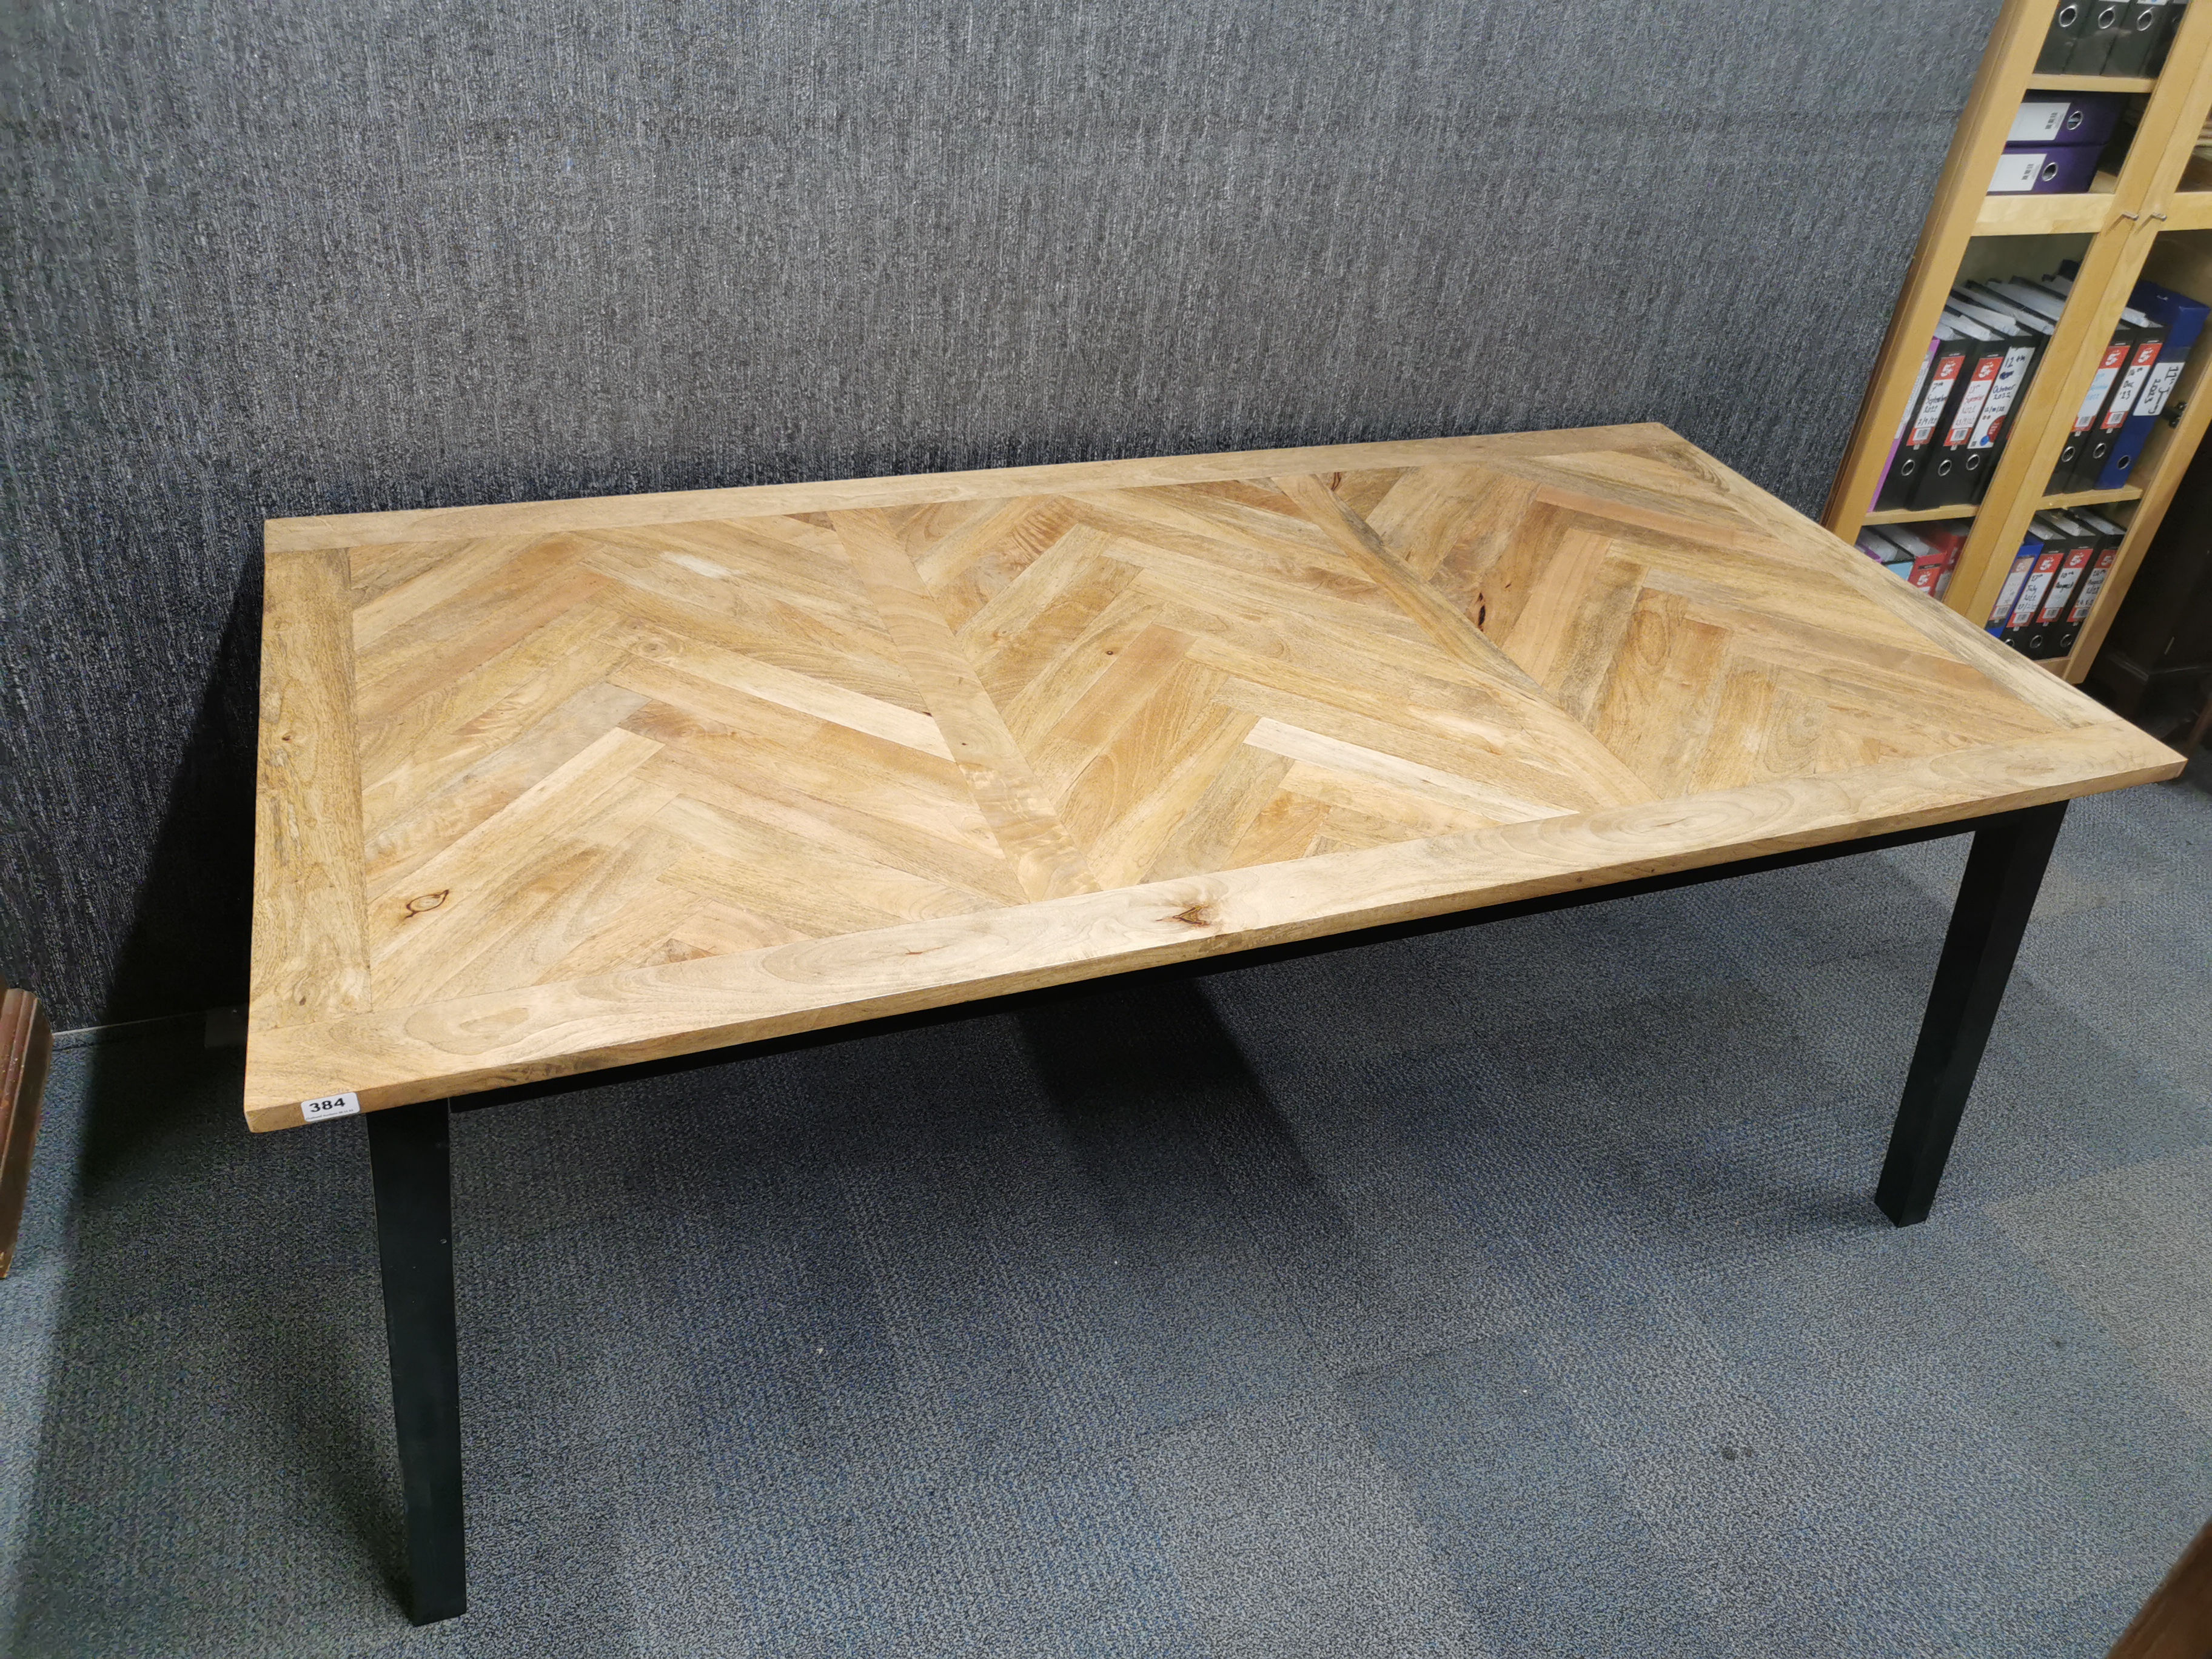 A large light oak dining table with painted base, 200 x 100cm. - Image 2 of 5